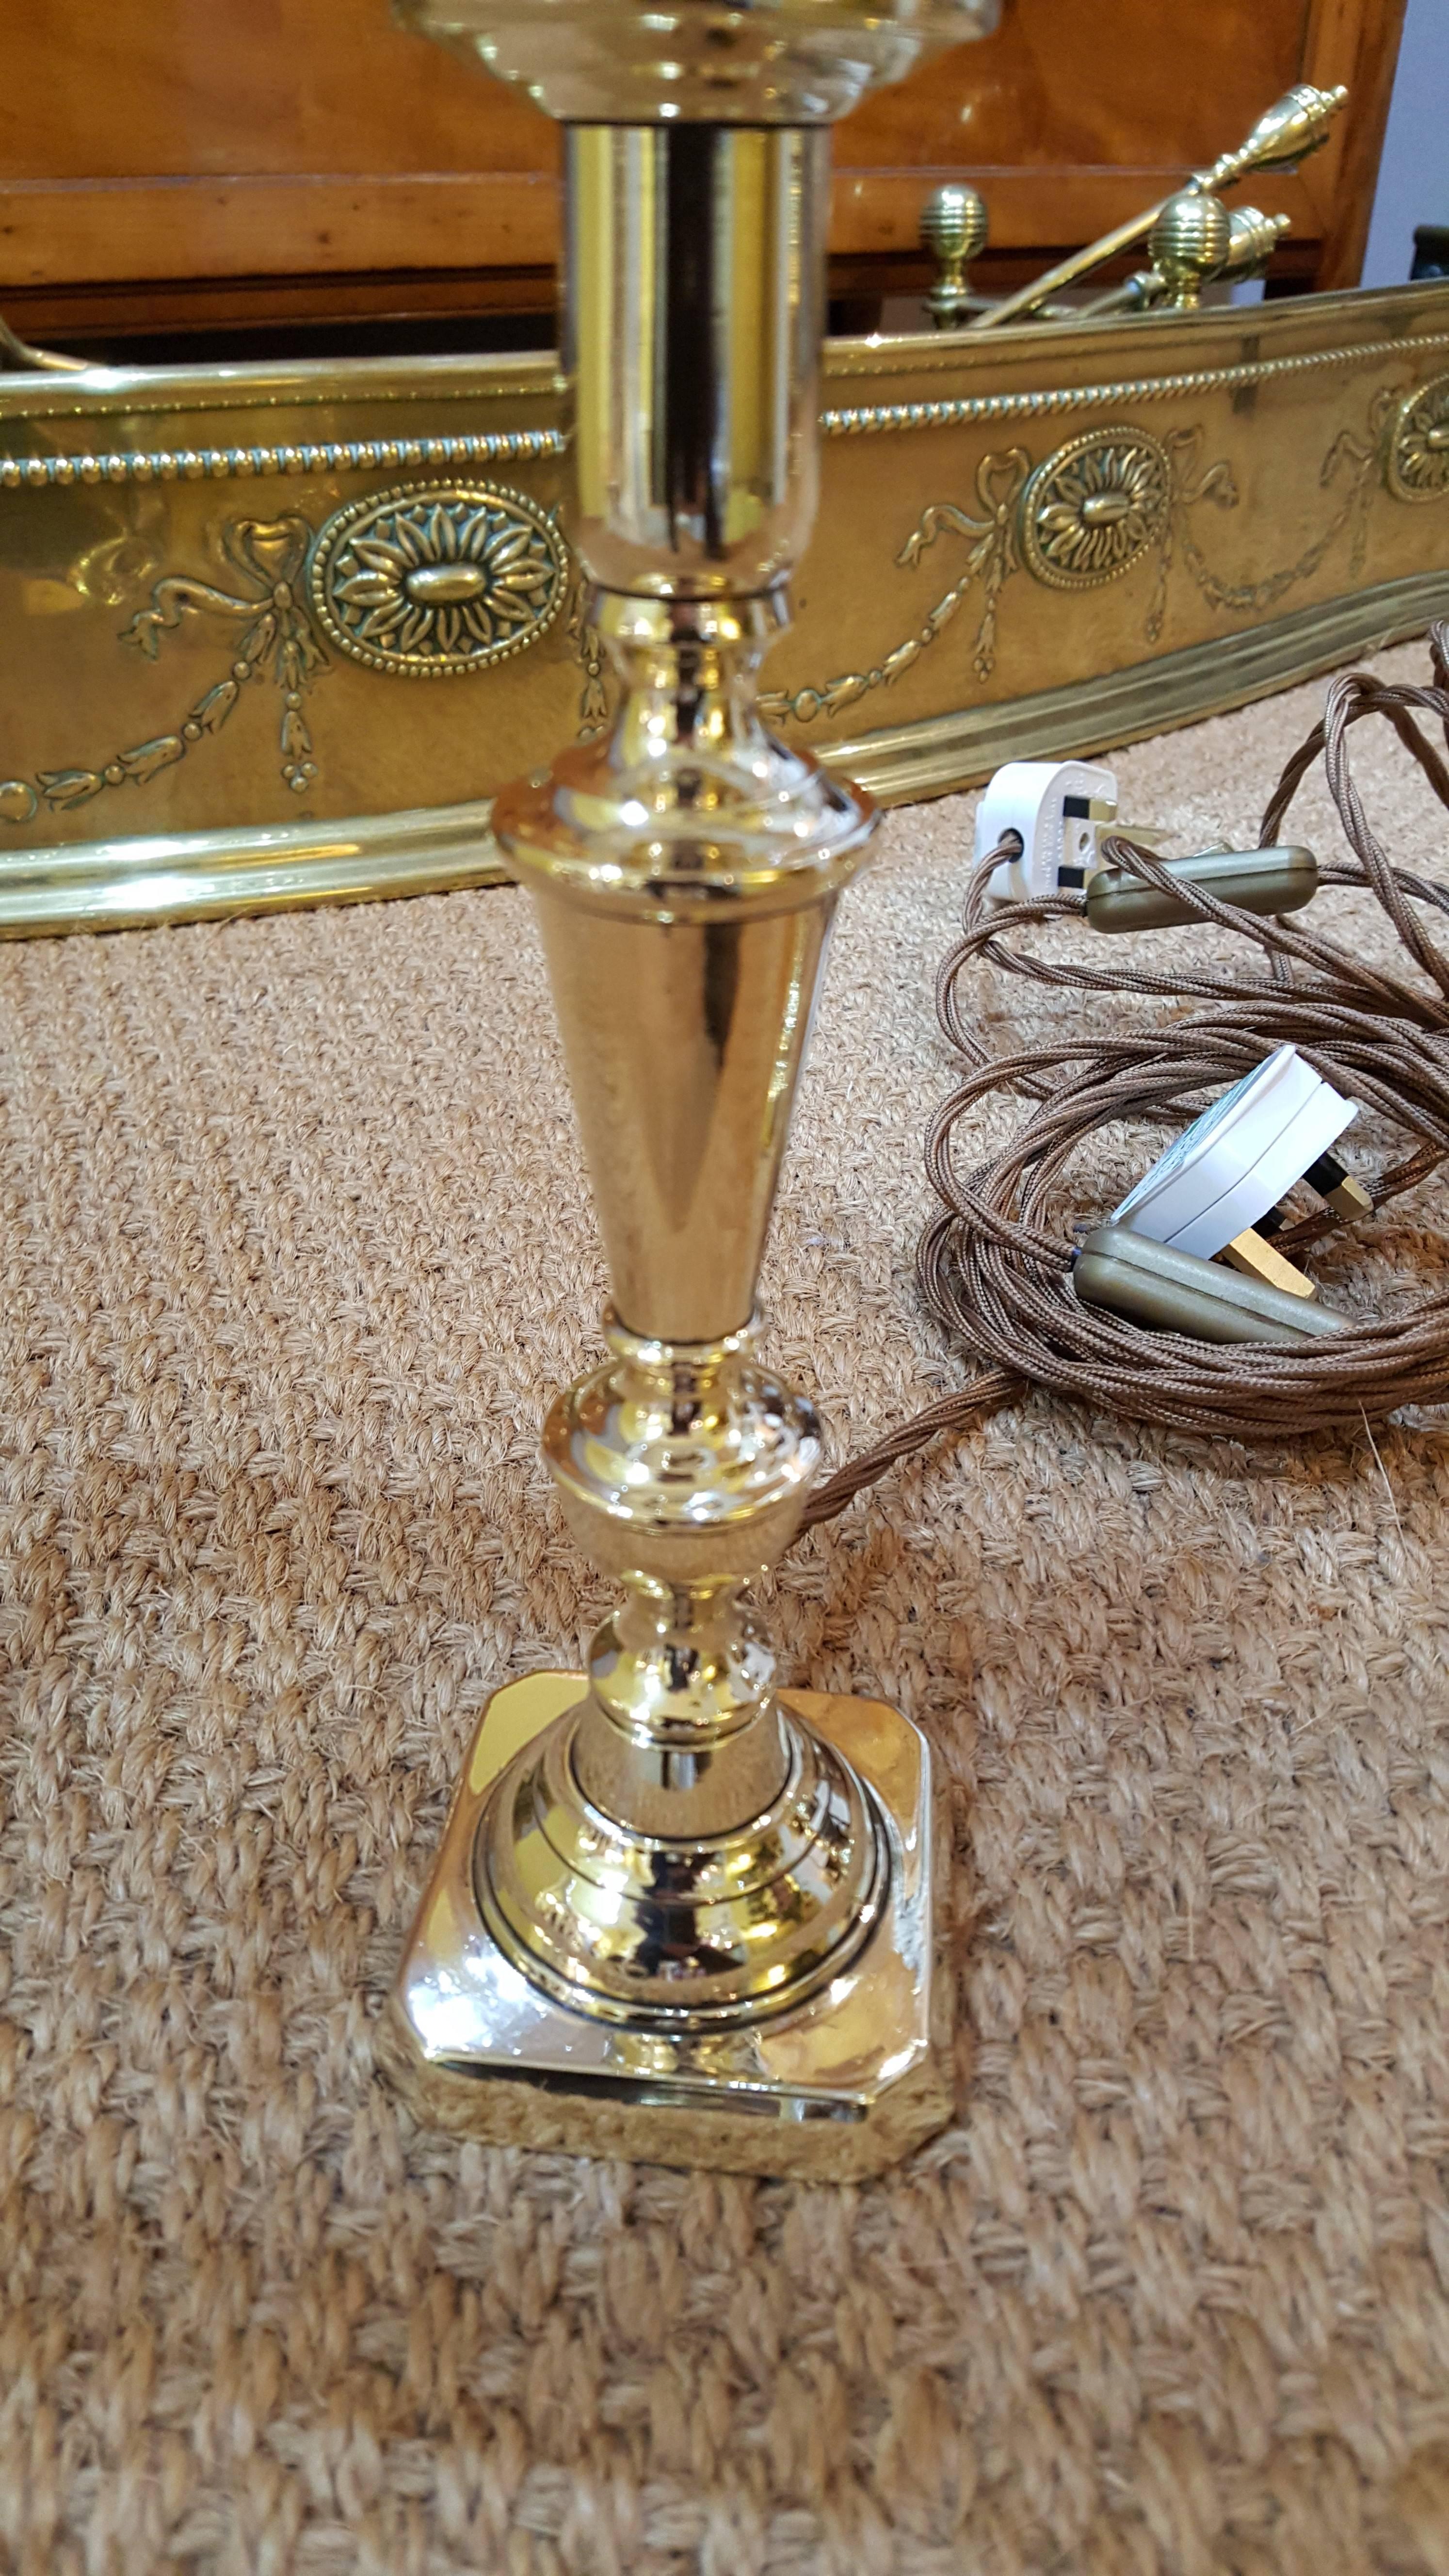 Pair of Edwardian brass candlesticks converted to electric table lights - all lights and lamps have been rewired with authentic corded flex, fitted with either foot switch or finger clicker switch and are Pat tested -
Measures: 6